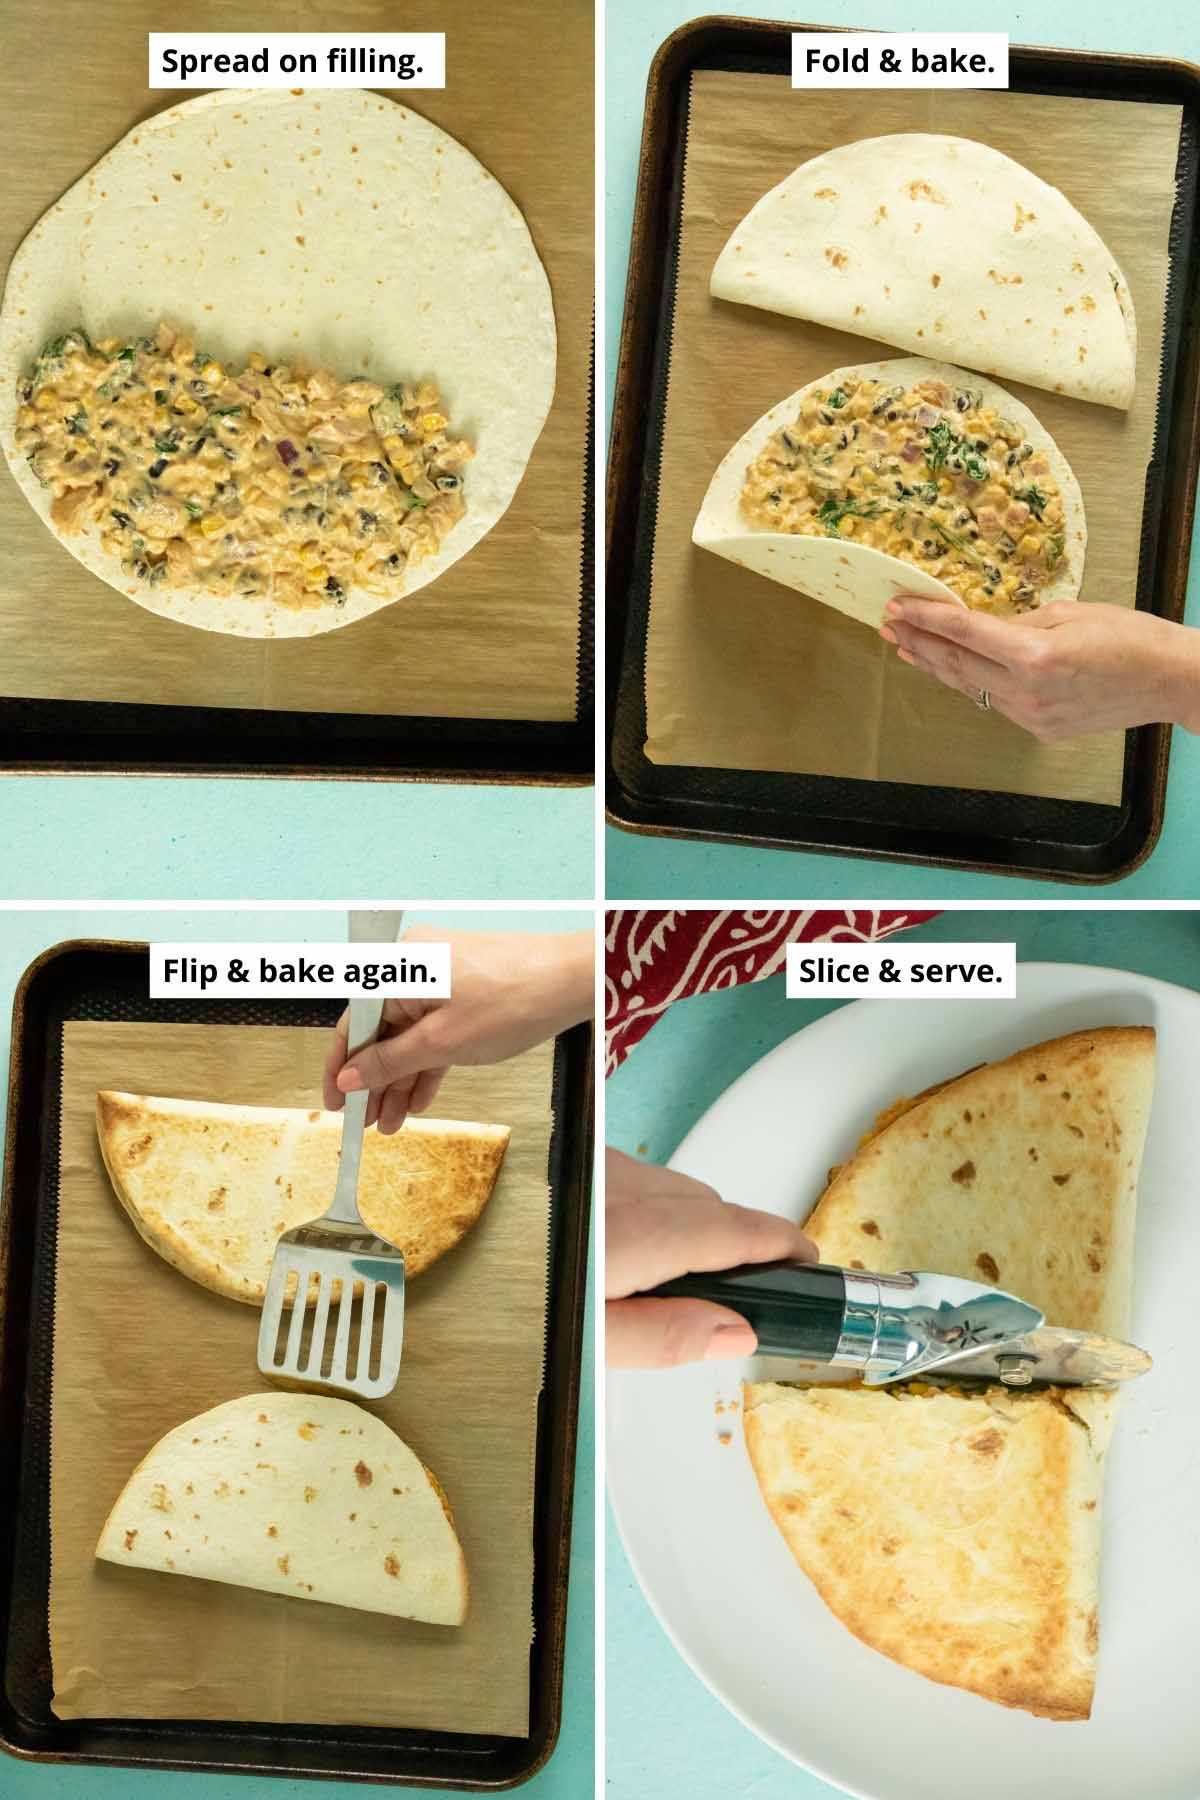 image collage showing folding and flipping the vegan quesadilla on the baking sheet